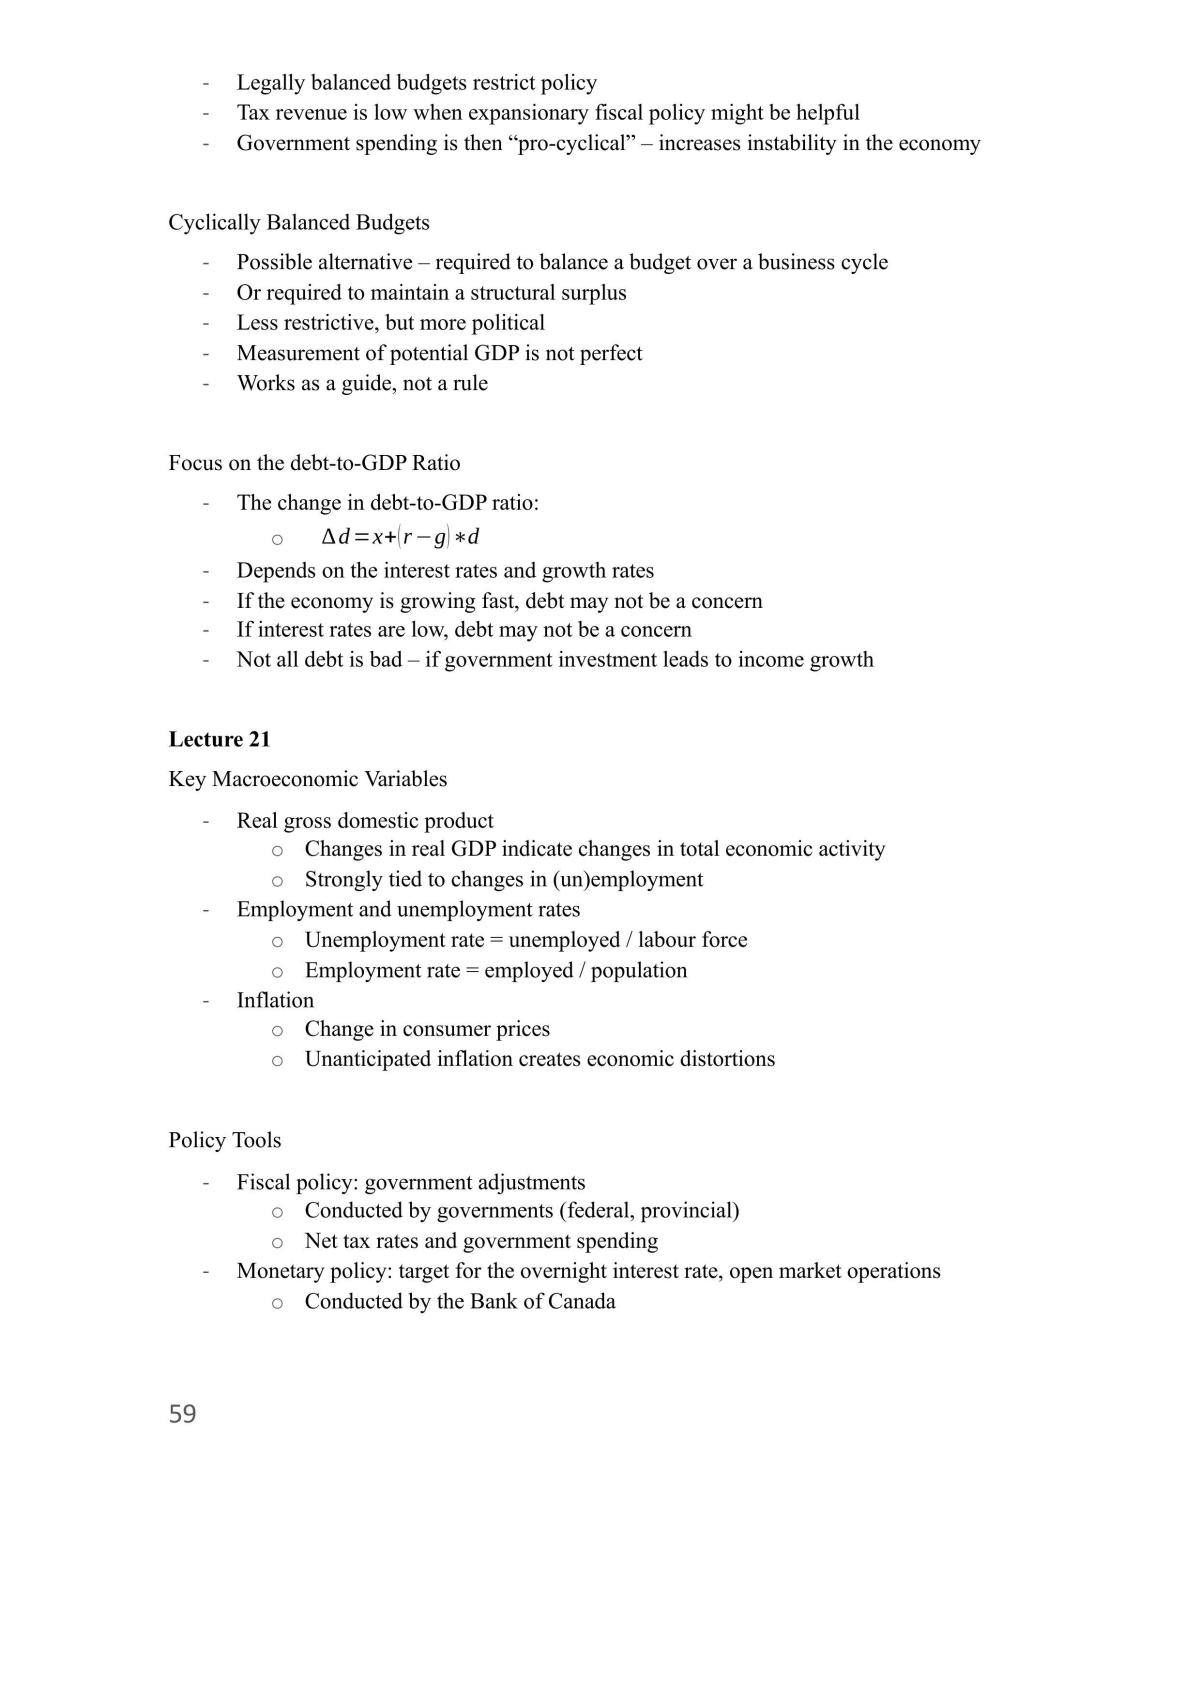 Introduction to Macroeconomics Course Notes - Page 59